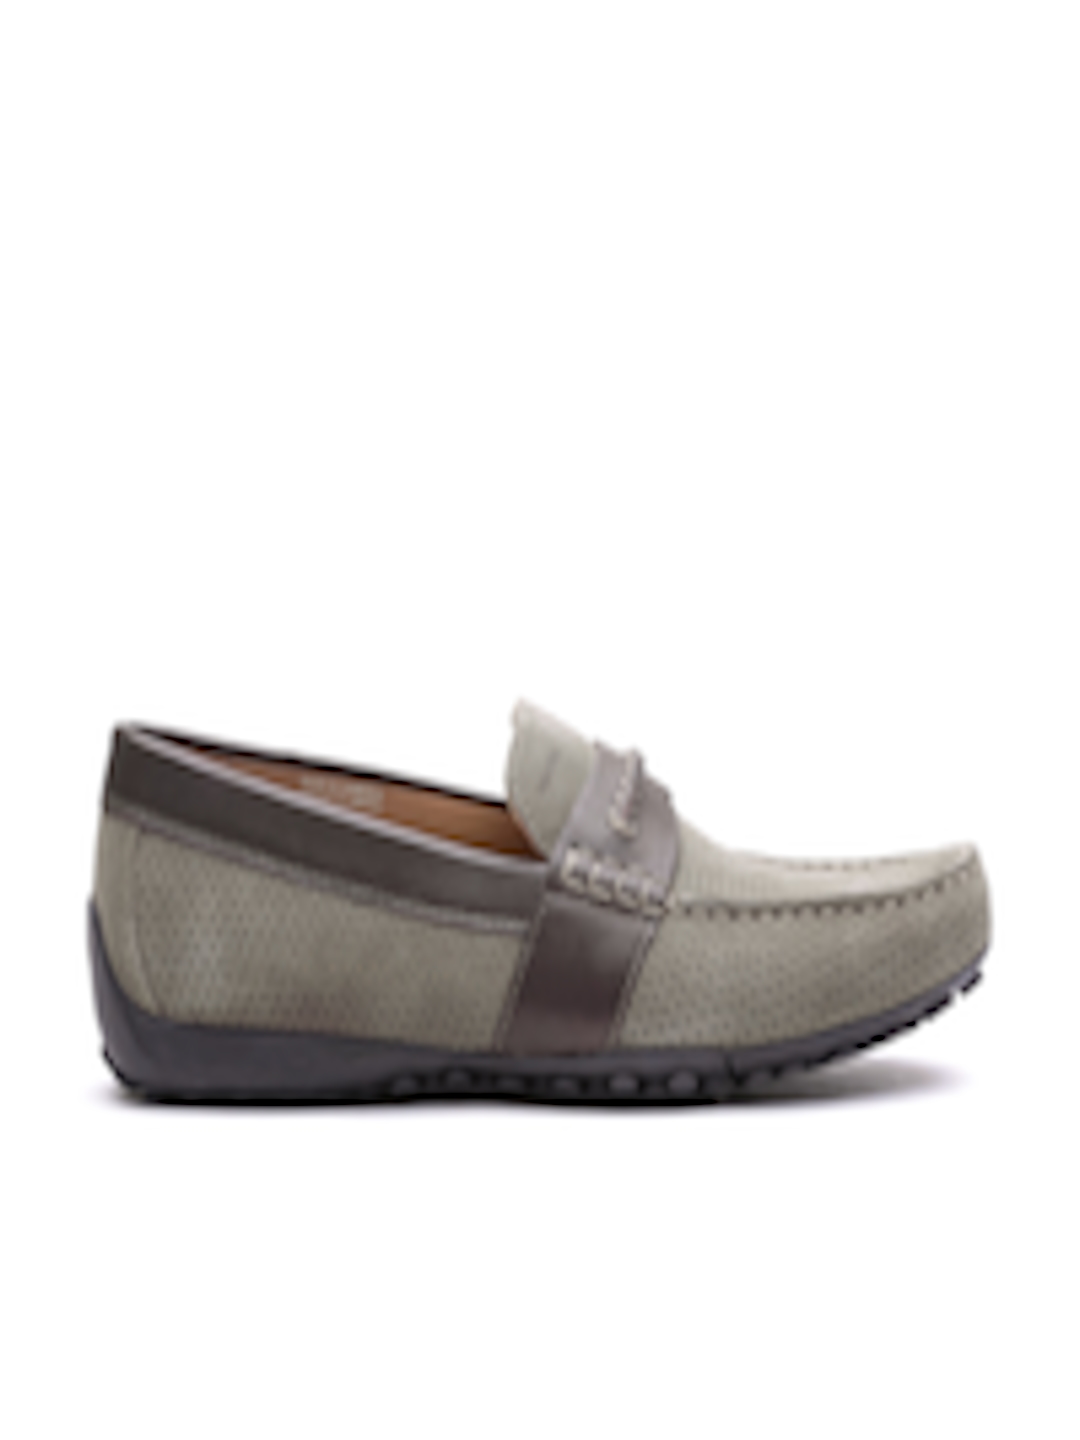 Buy GEOX Respira Men Grey Italian Patent Suede Loafers - Casual Shoes ...